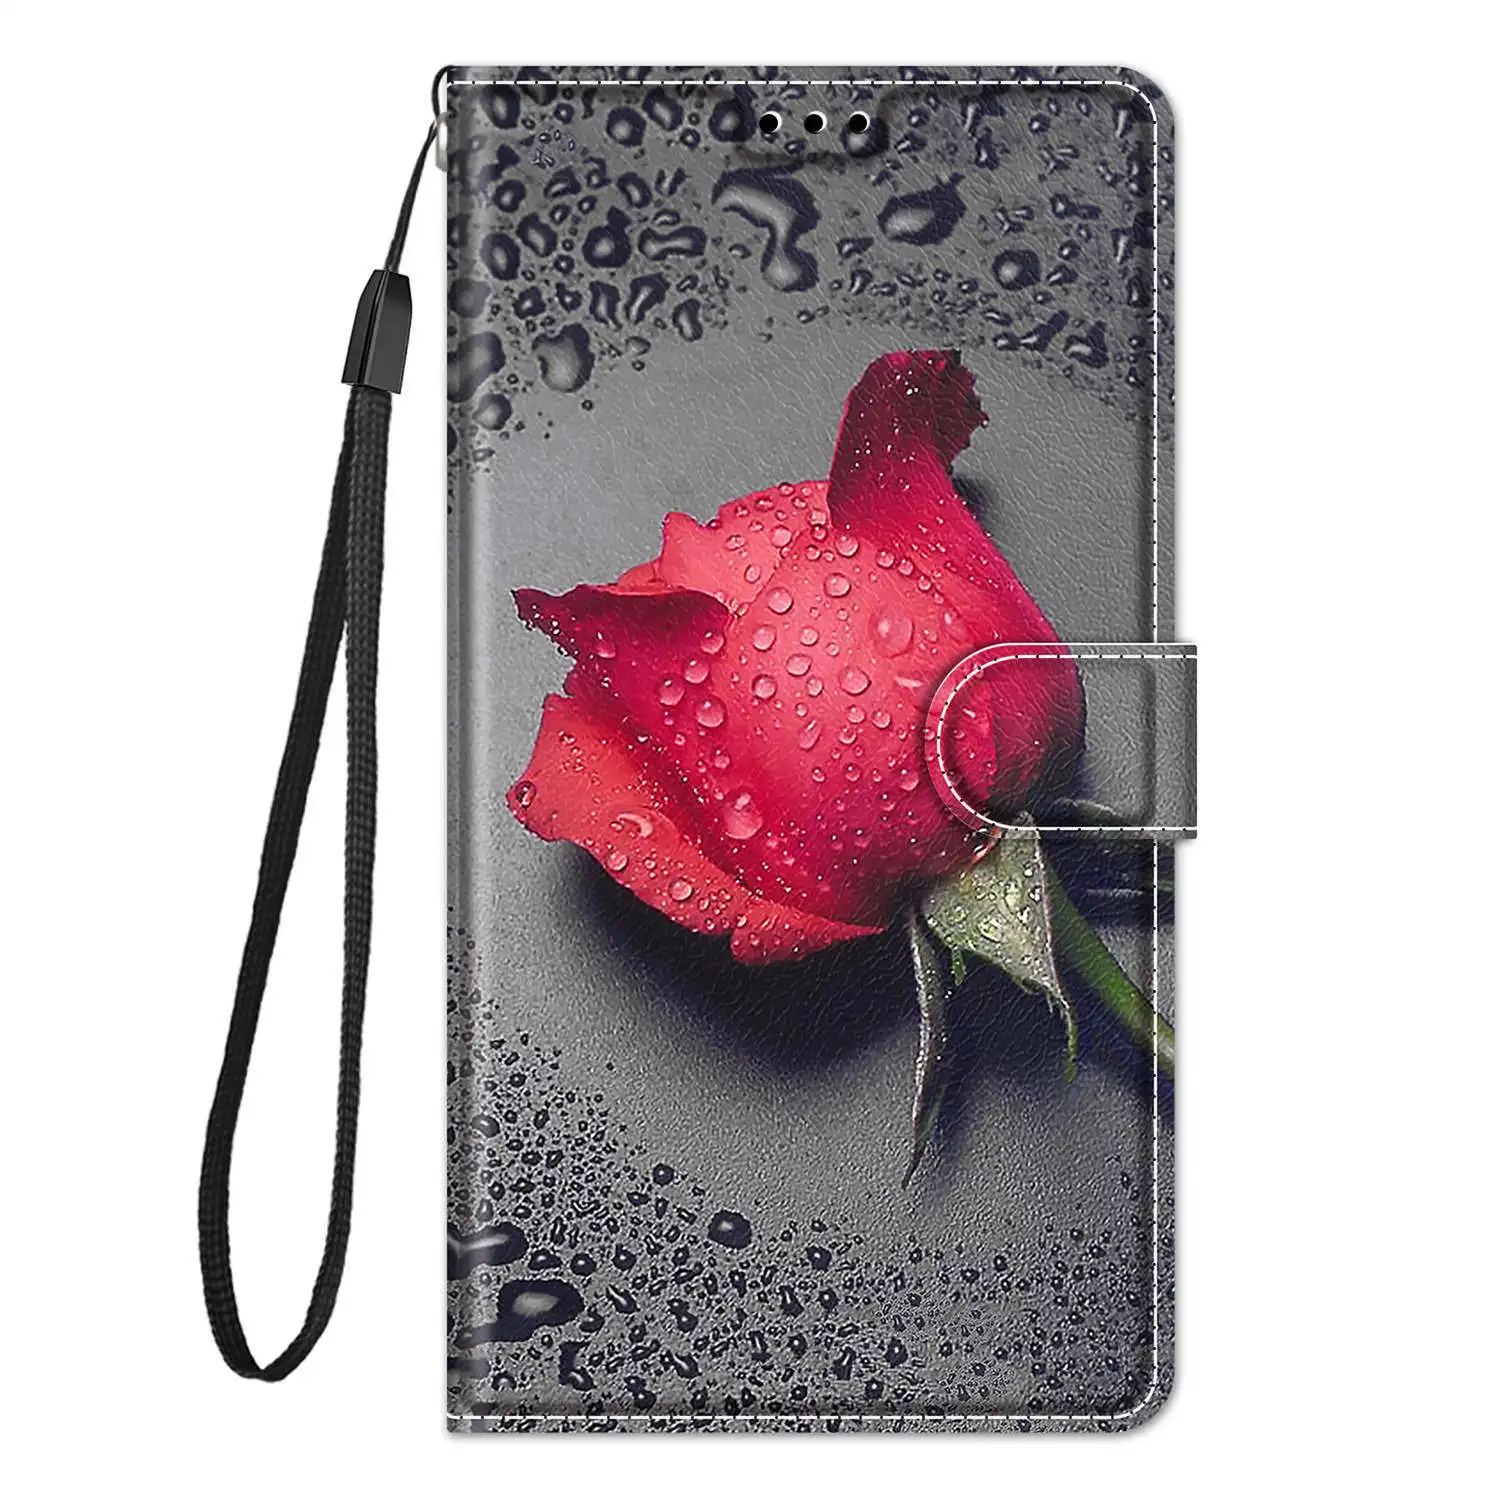 Etui Flip Leather Phone Case For OPPO A53 A53S A73 A93 A93S A54 A74 A94 4G 5G Fasion Girl Wallet Card Holder Stand Book Cover oppo phone back cover Cases For OPPO